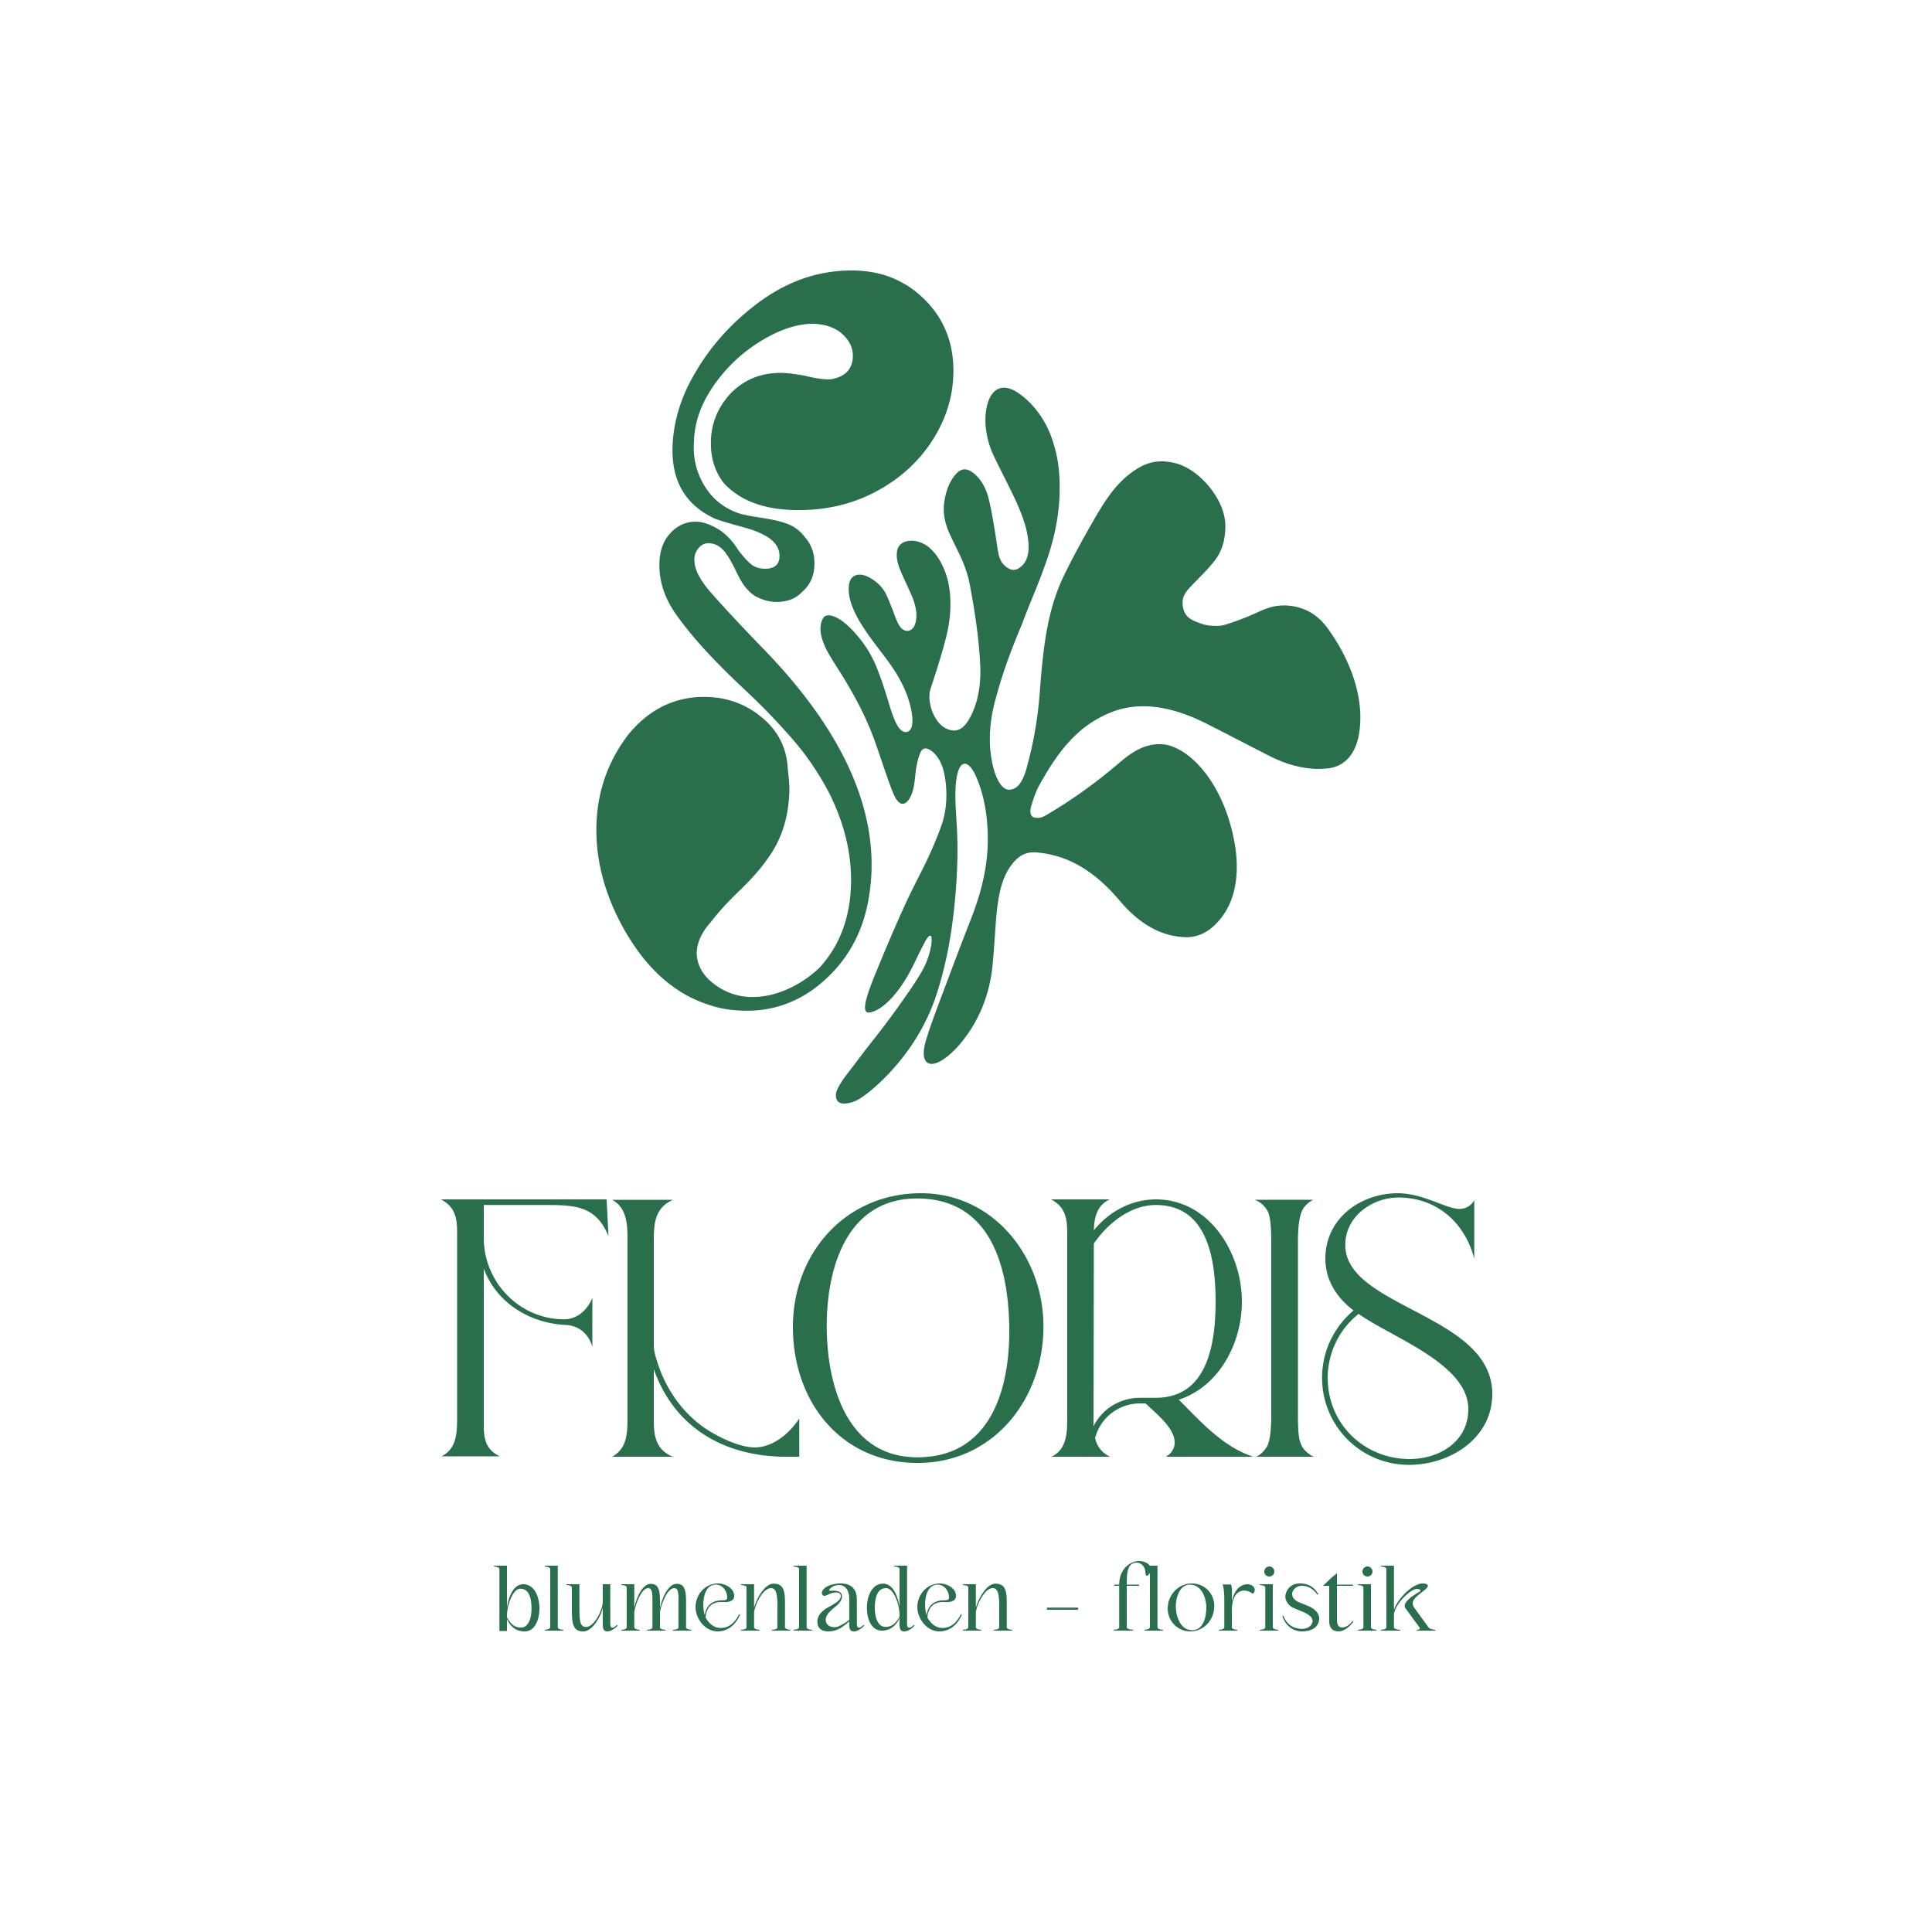 Floris logo design by logo designer Sparrow Design for your inspiration and for the worlds largest logo competition